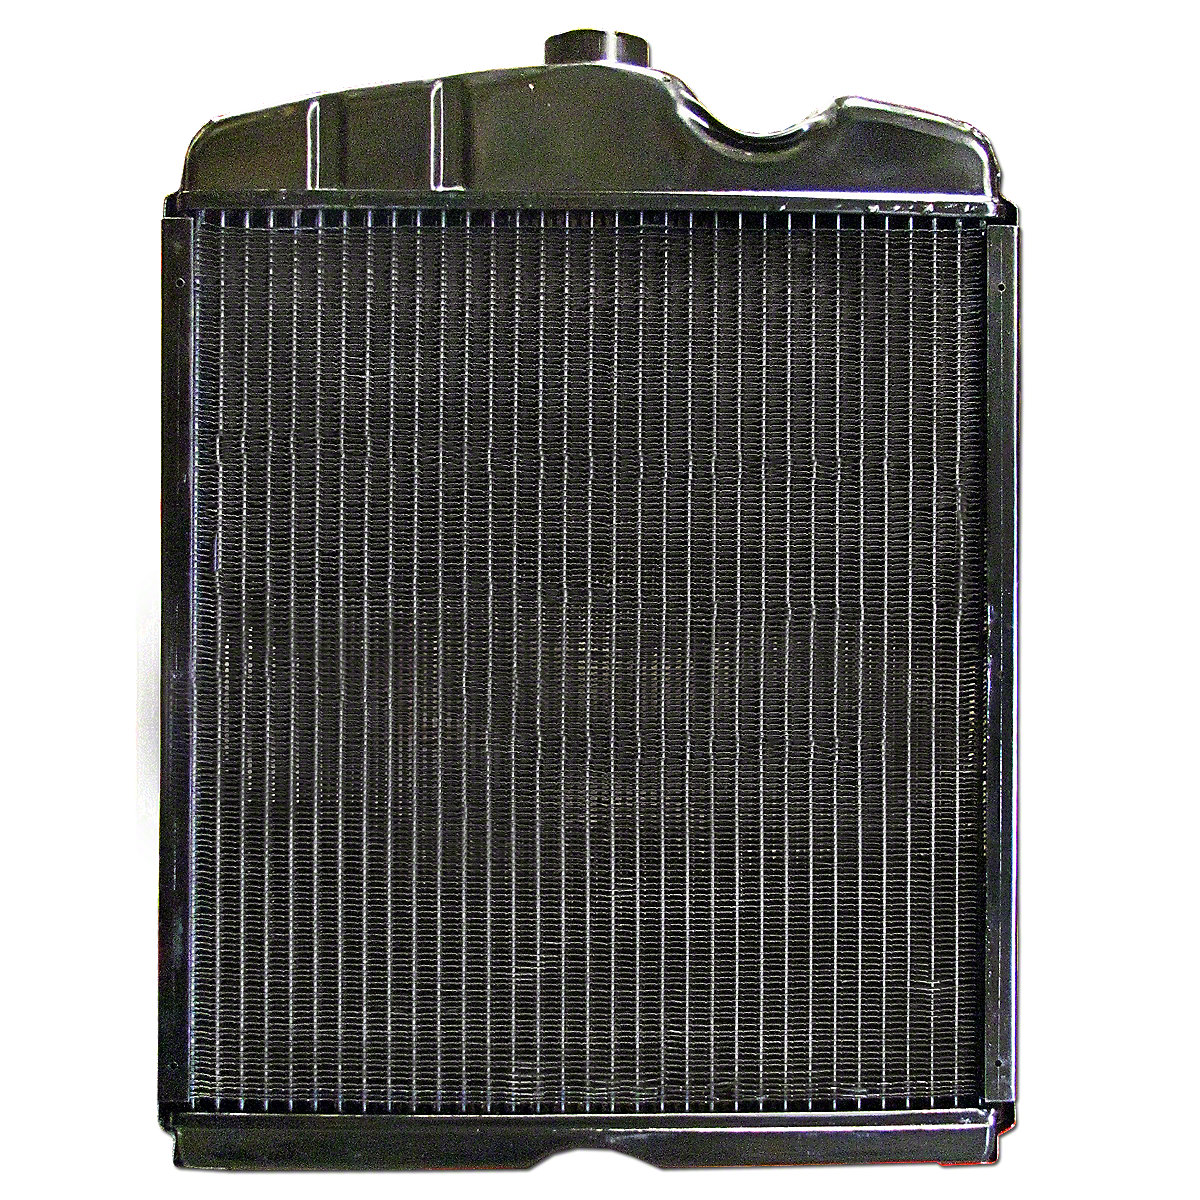 Gas and diesel tractors with non-pressurized cooling systems use this radiator. In stock, ready to ship! 